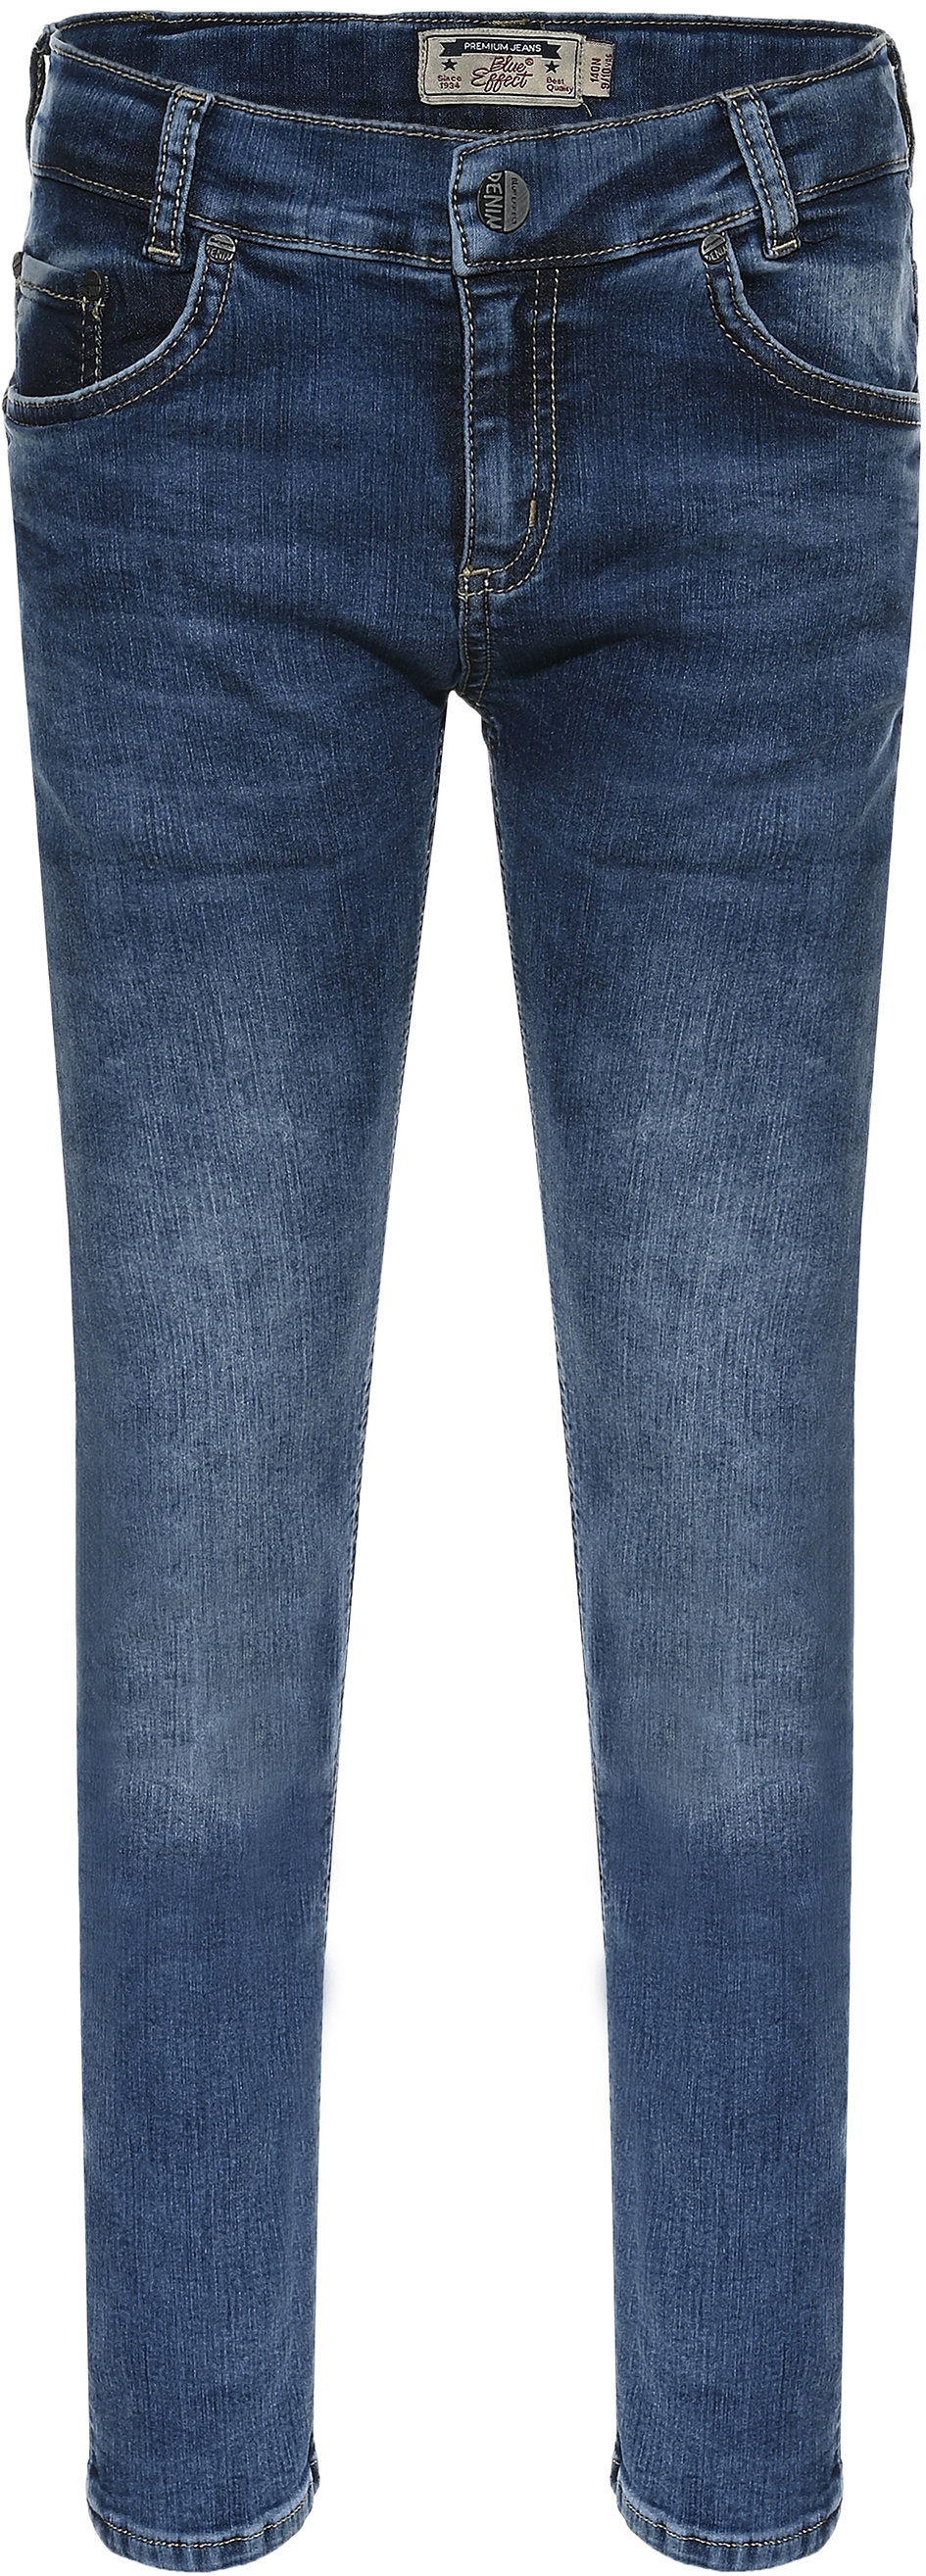 2726-NOS Boys Jeans Relaxed Fit, Ultrastretch, verfügbar in Normal